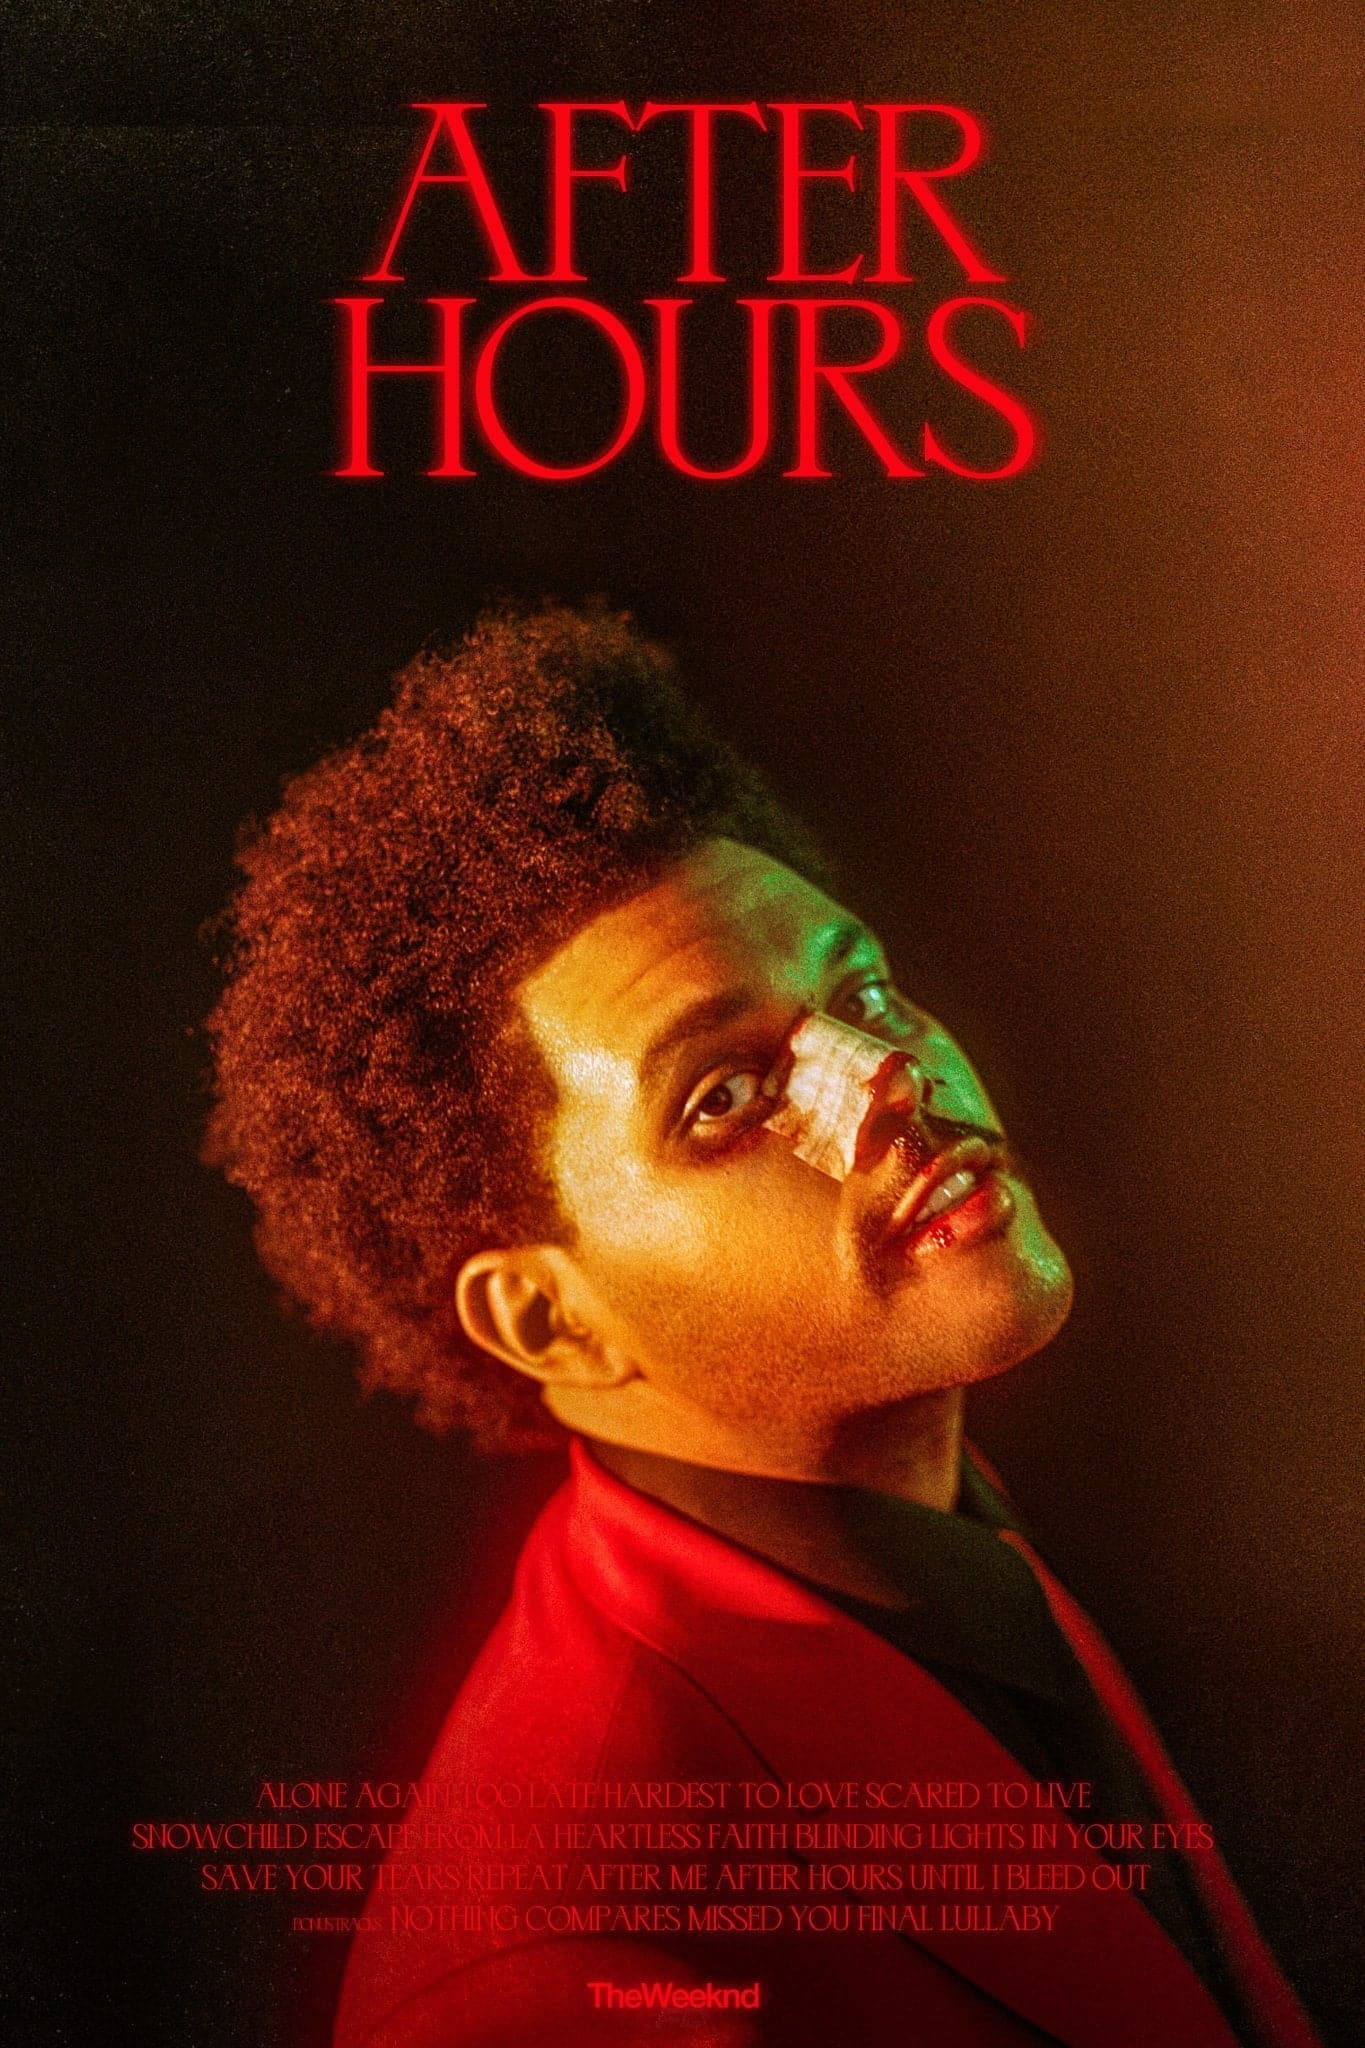 the weekend-after hours poster  The weeknd poster, Music poster design,  Music poster ideas